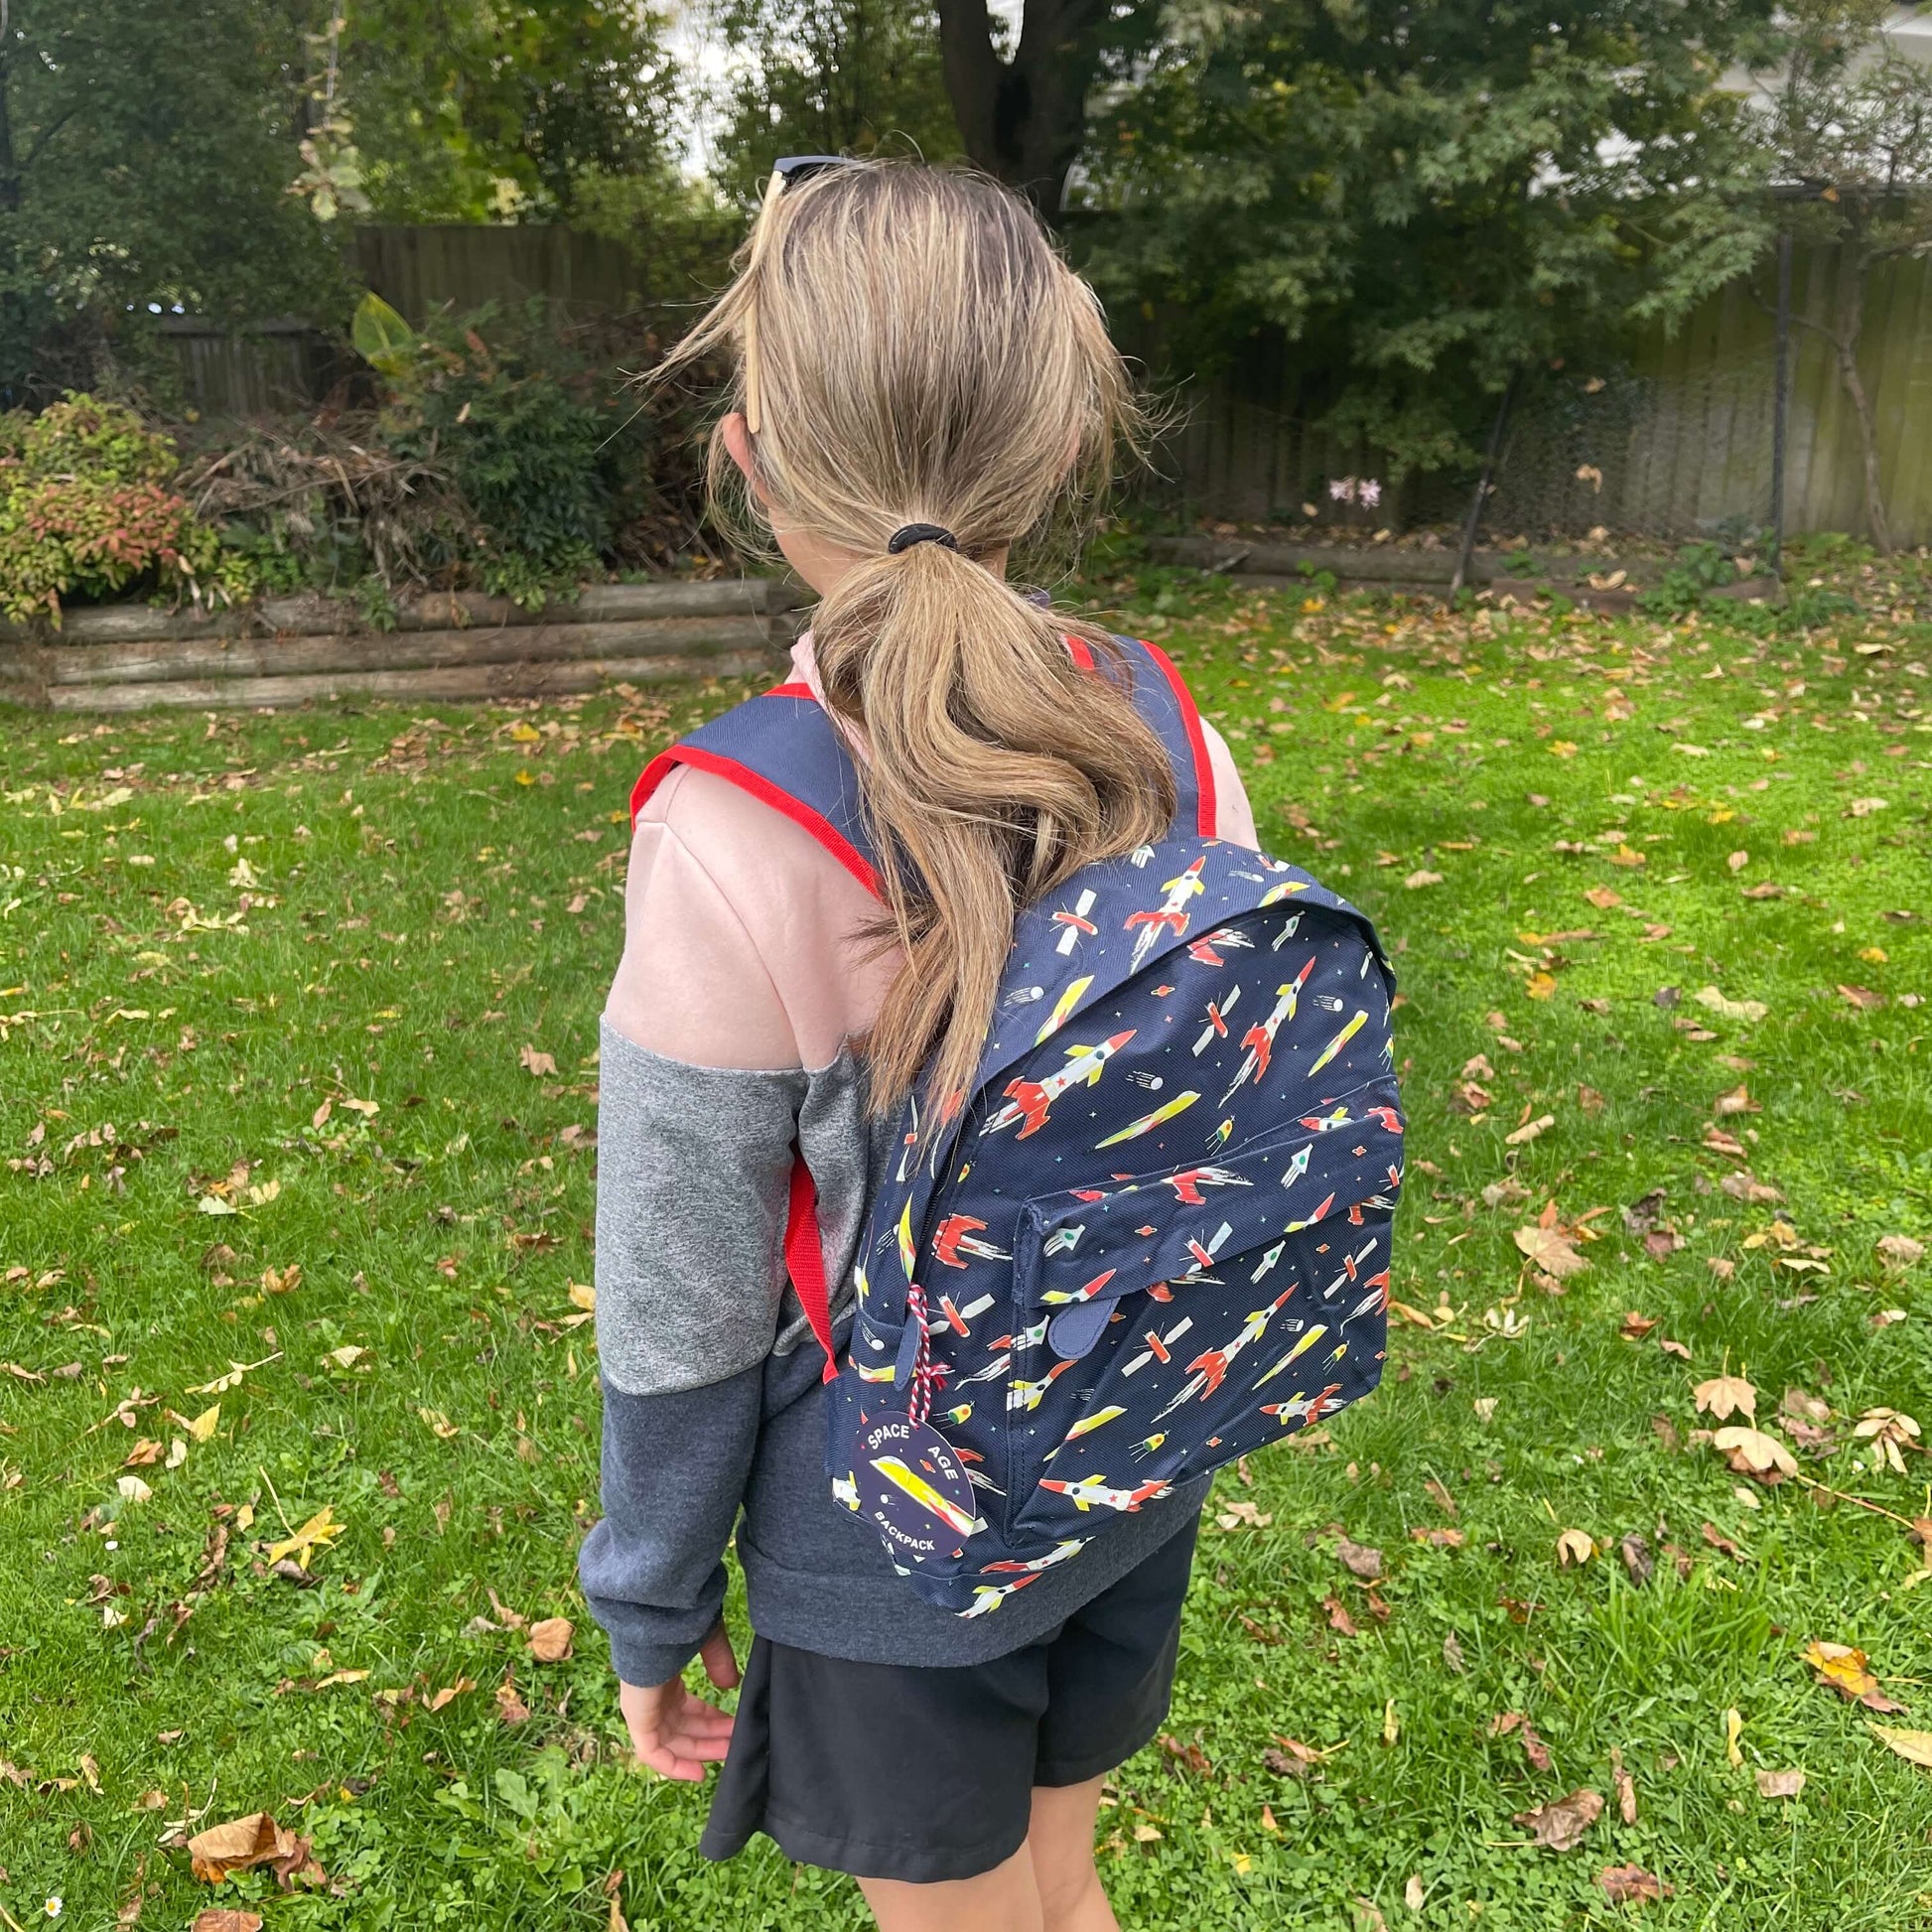 Girl wearing a navy blue backpack with rockets and space ships printed on it.